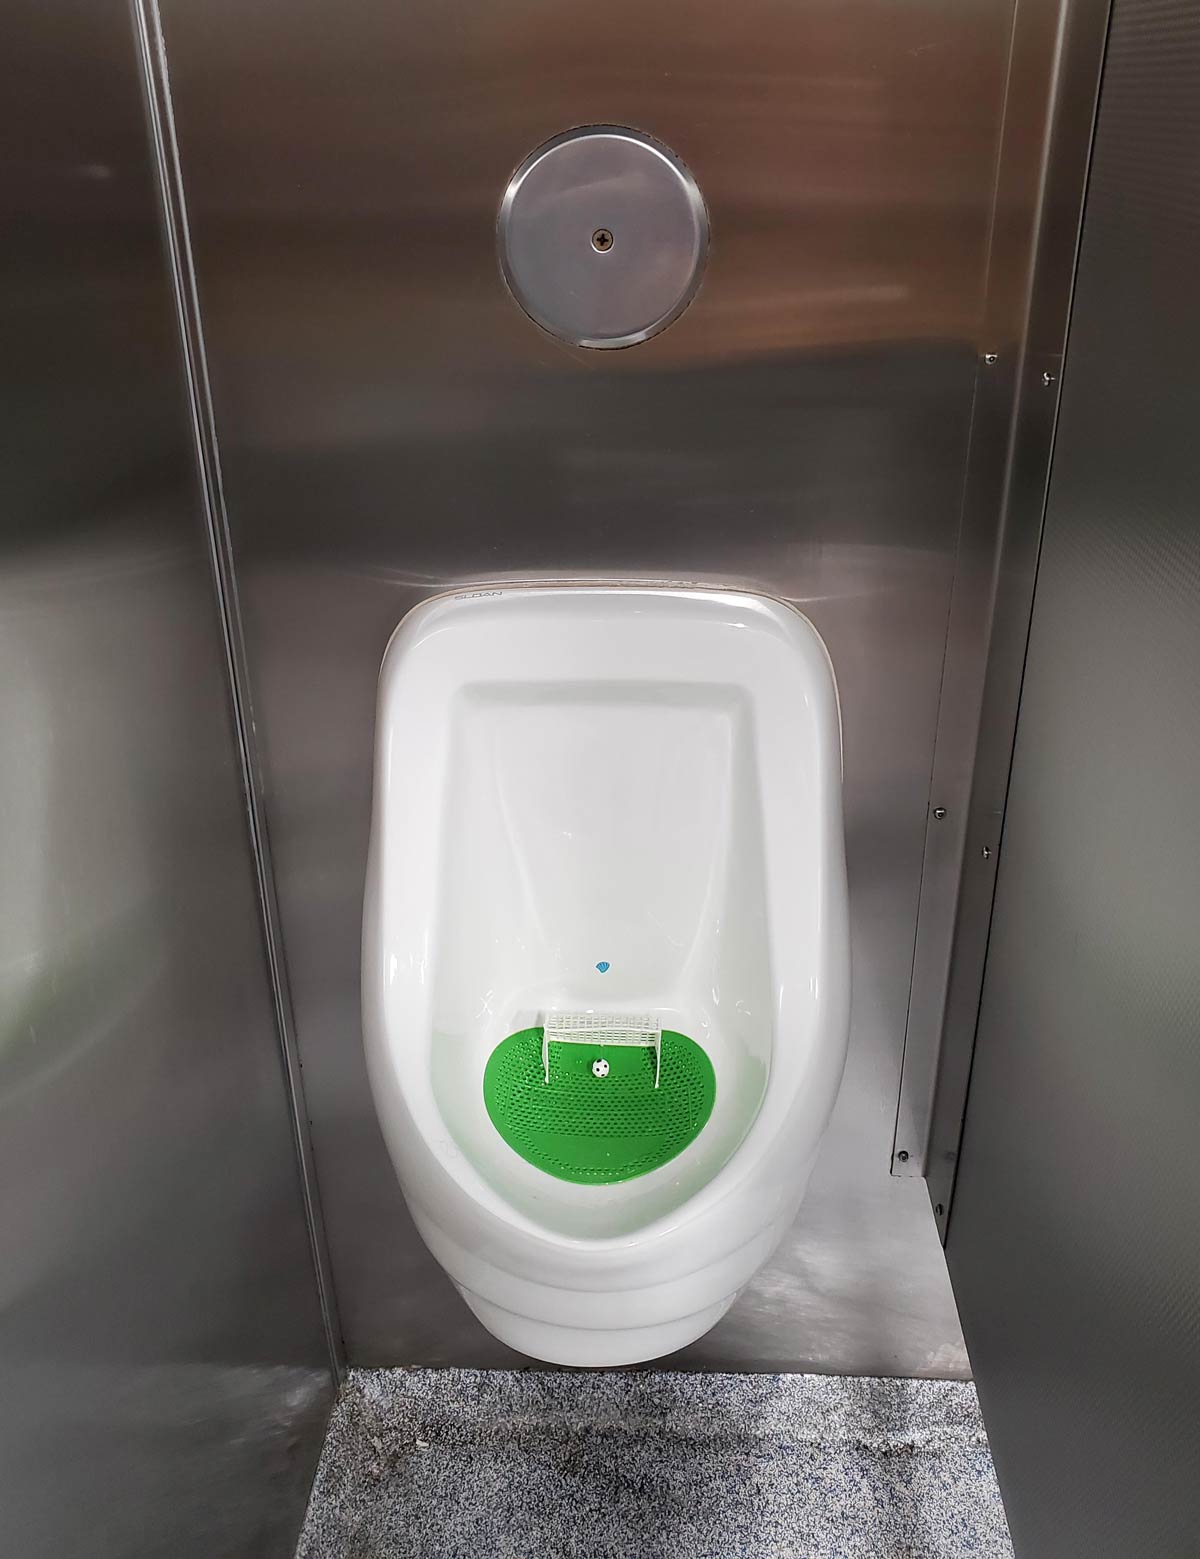 This urinal has a soccer game